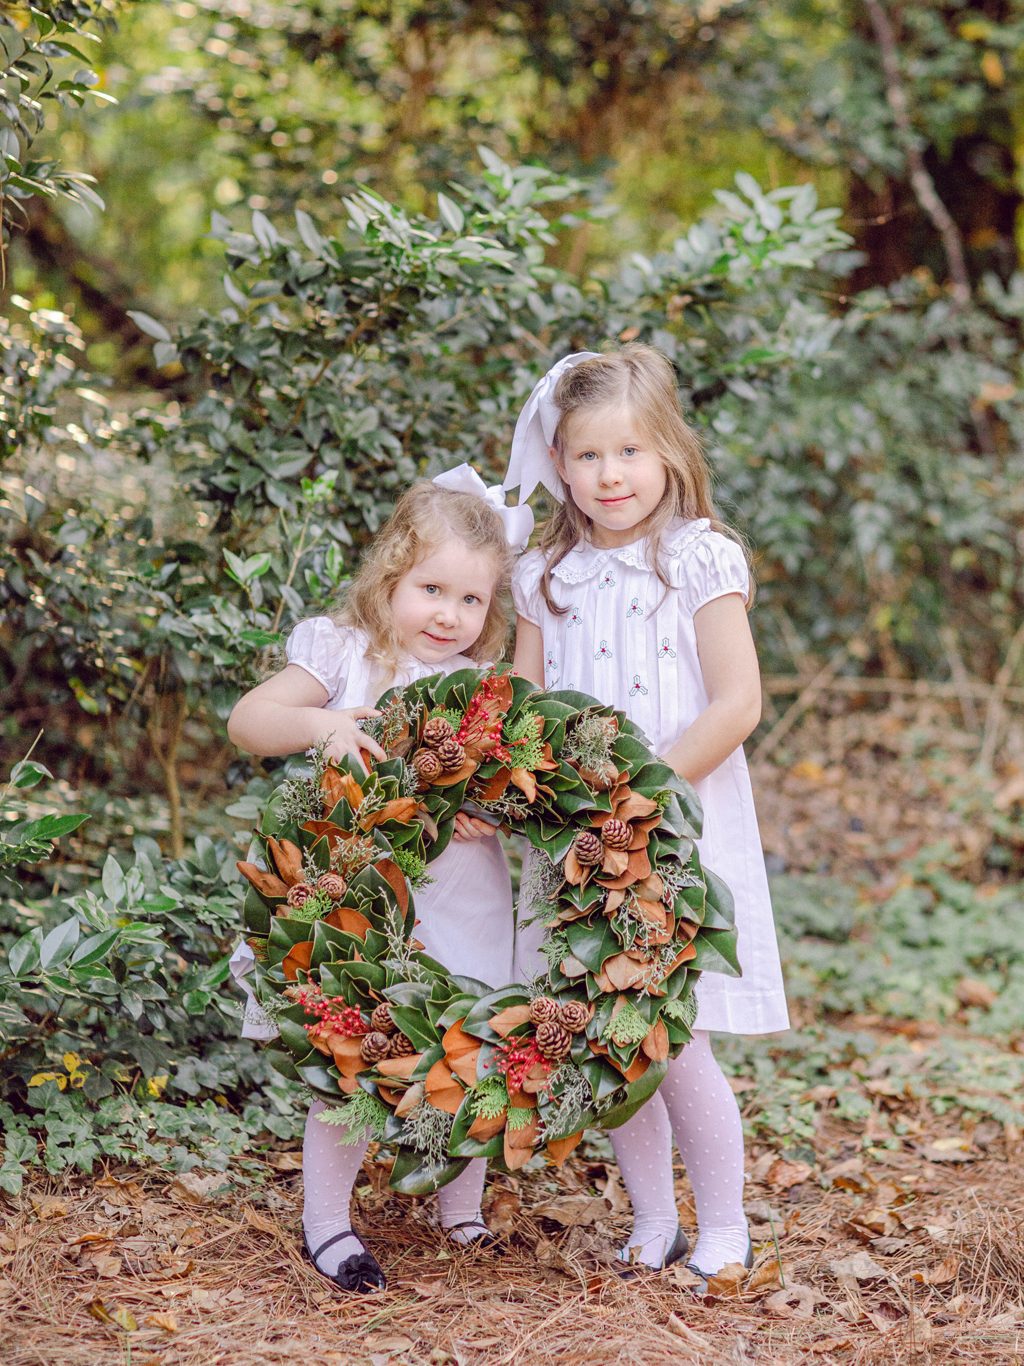 Southern Christmas child photography in Athens, GA.